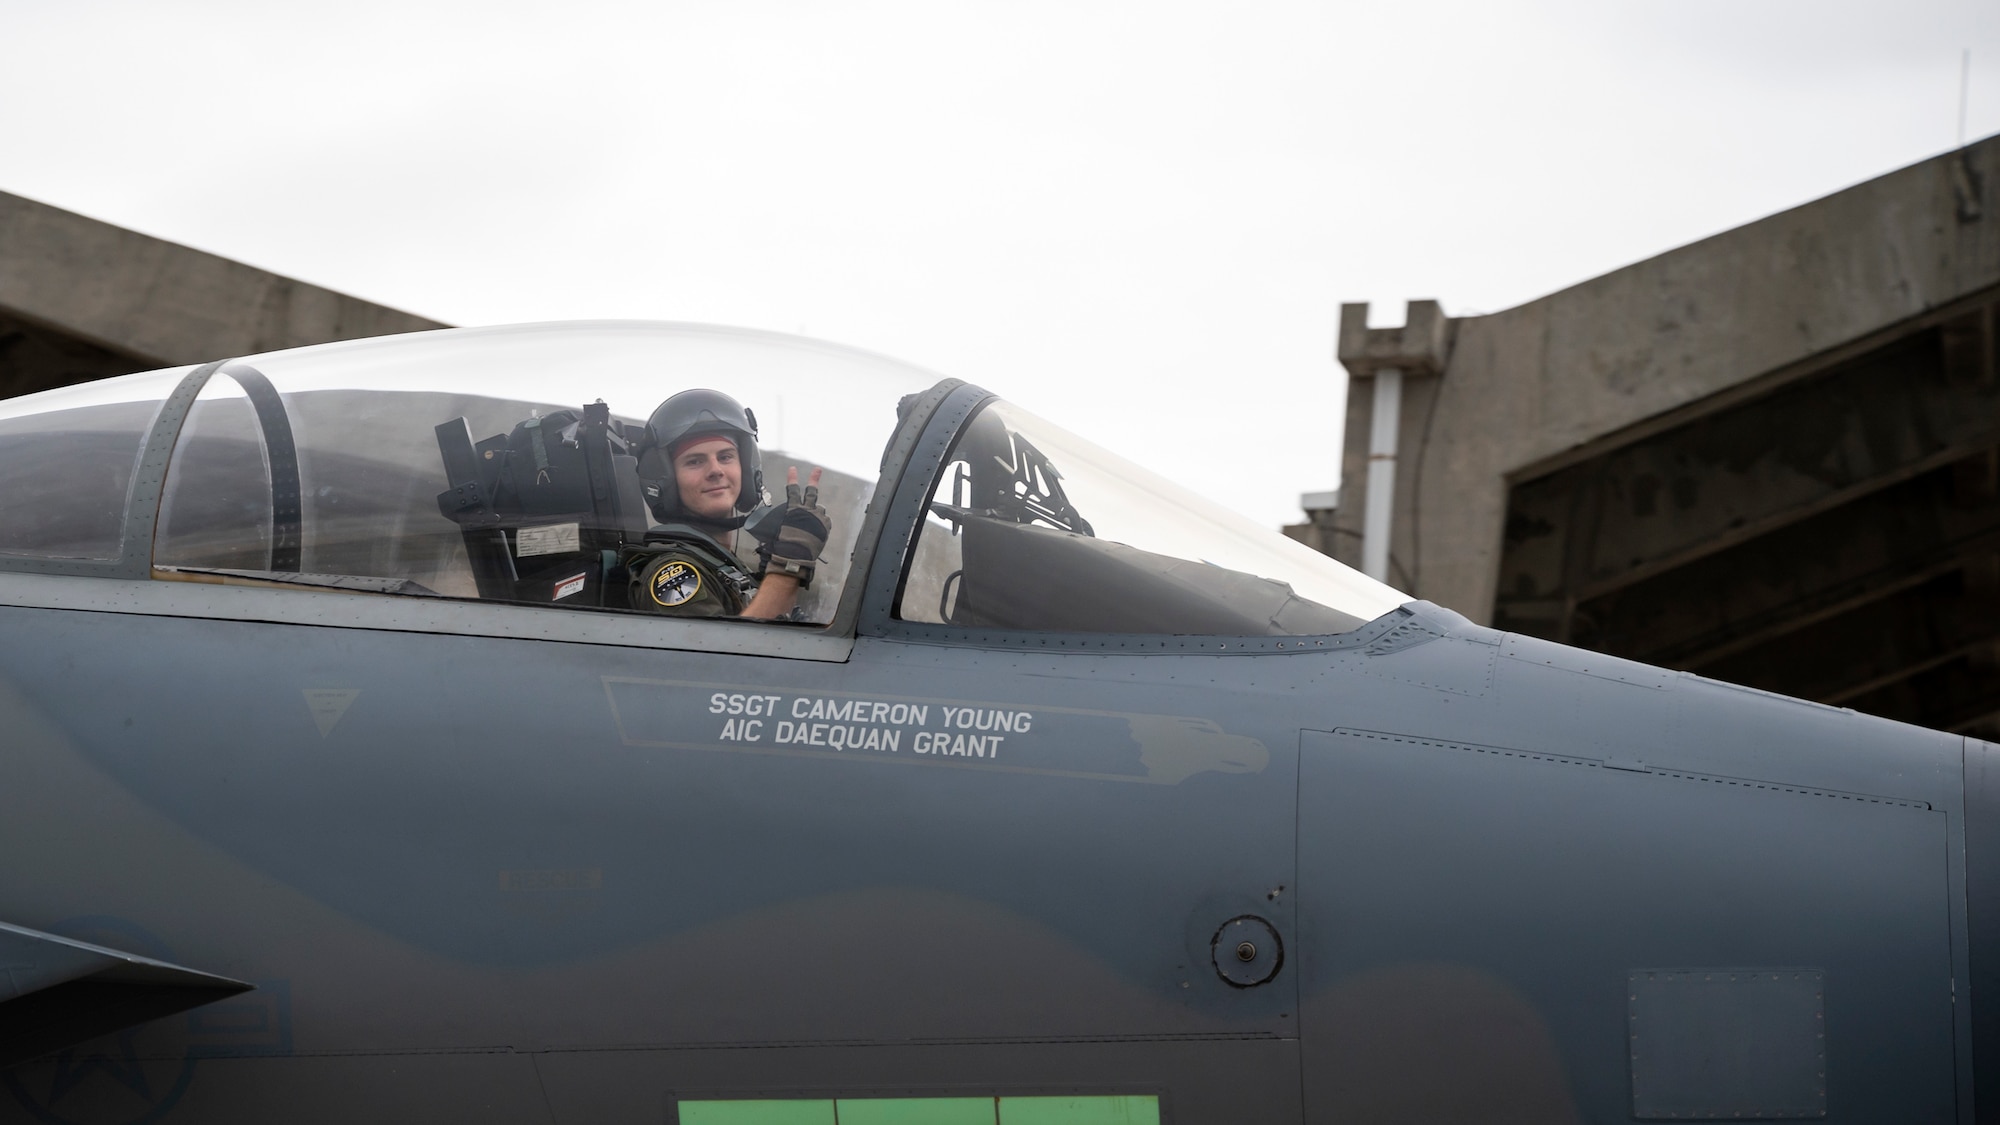 A U.S. Air Force pilot assigned to the 44th Fighter Squadron taxis down the flightline in an F-15C Eagle for the final time at Kadena Air Base, Japan, Dec. 1, 2022. The departure of the first batch of retiring Eagles is a necessary step in ensuring Team Kadena remains postured to defend Japan and maintain regional stability. (U.S. Air Force photo by Senior Airman Jessi Roth)